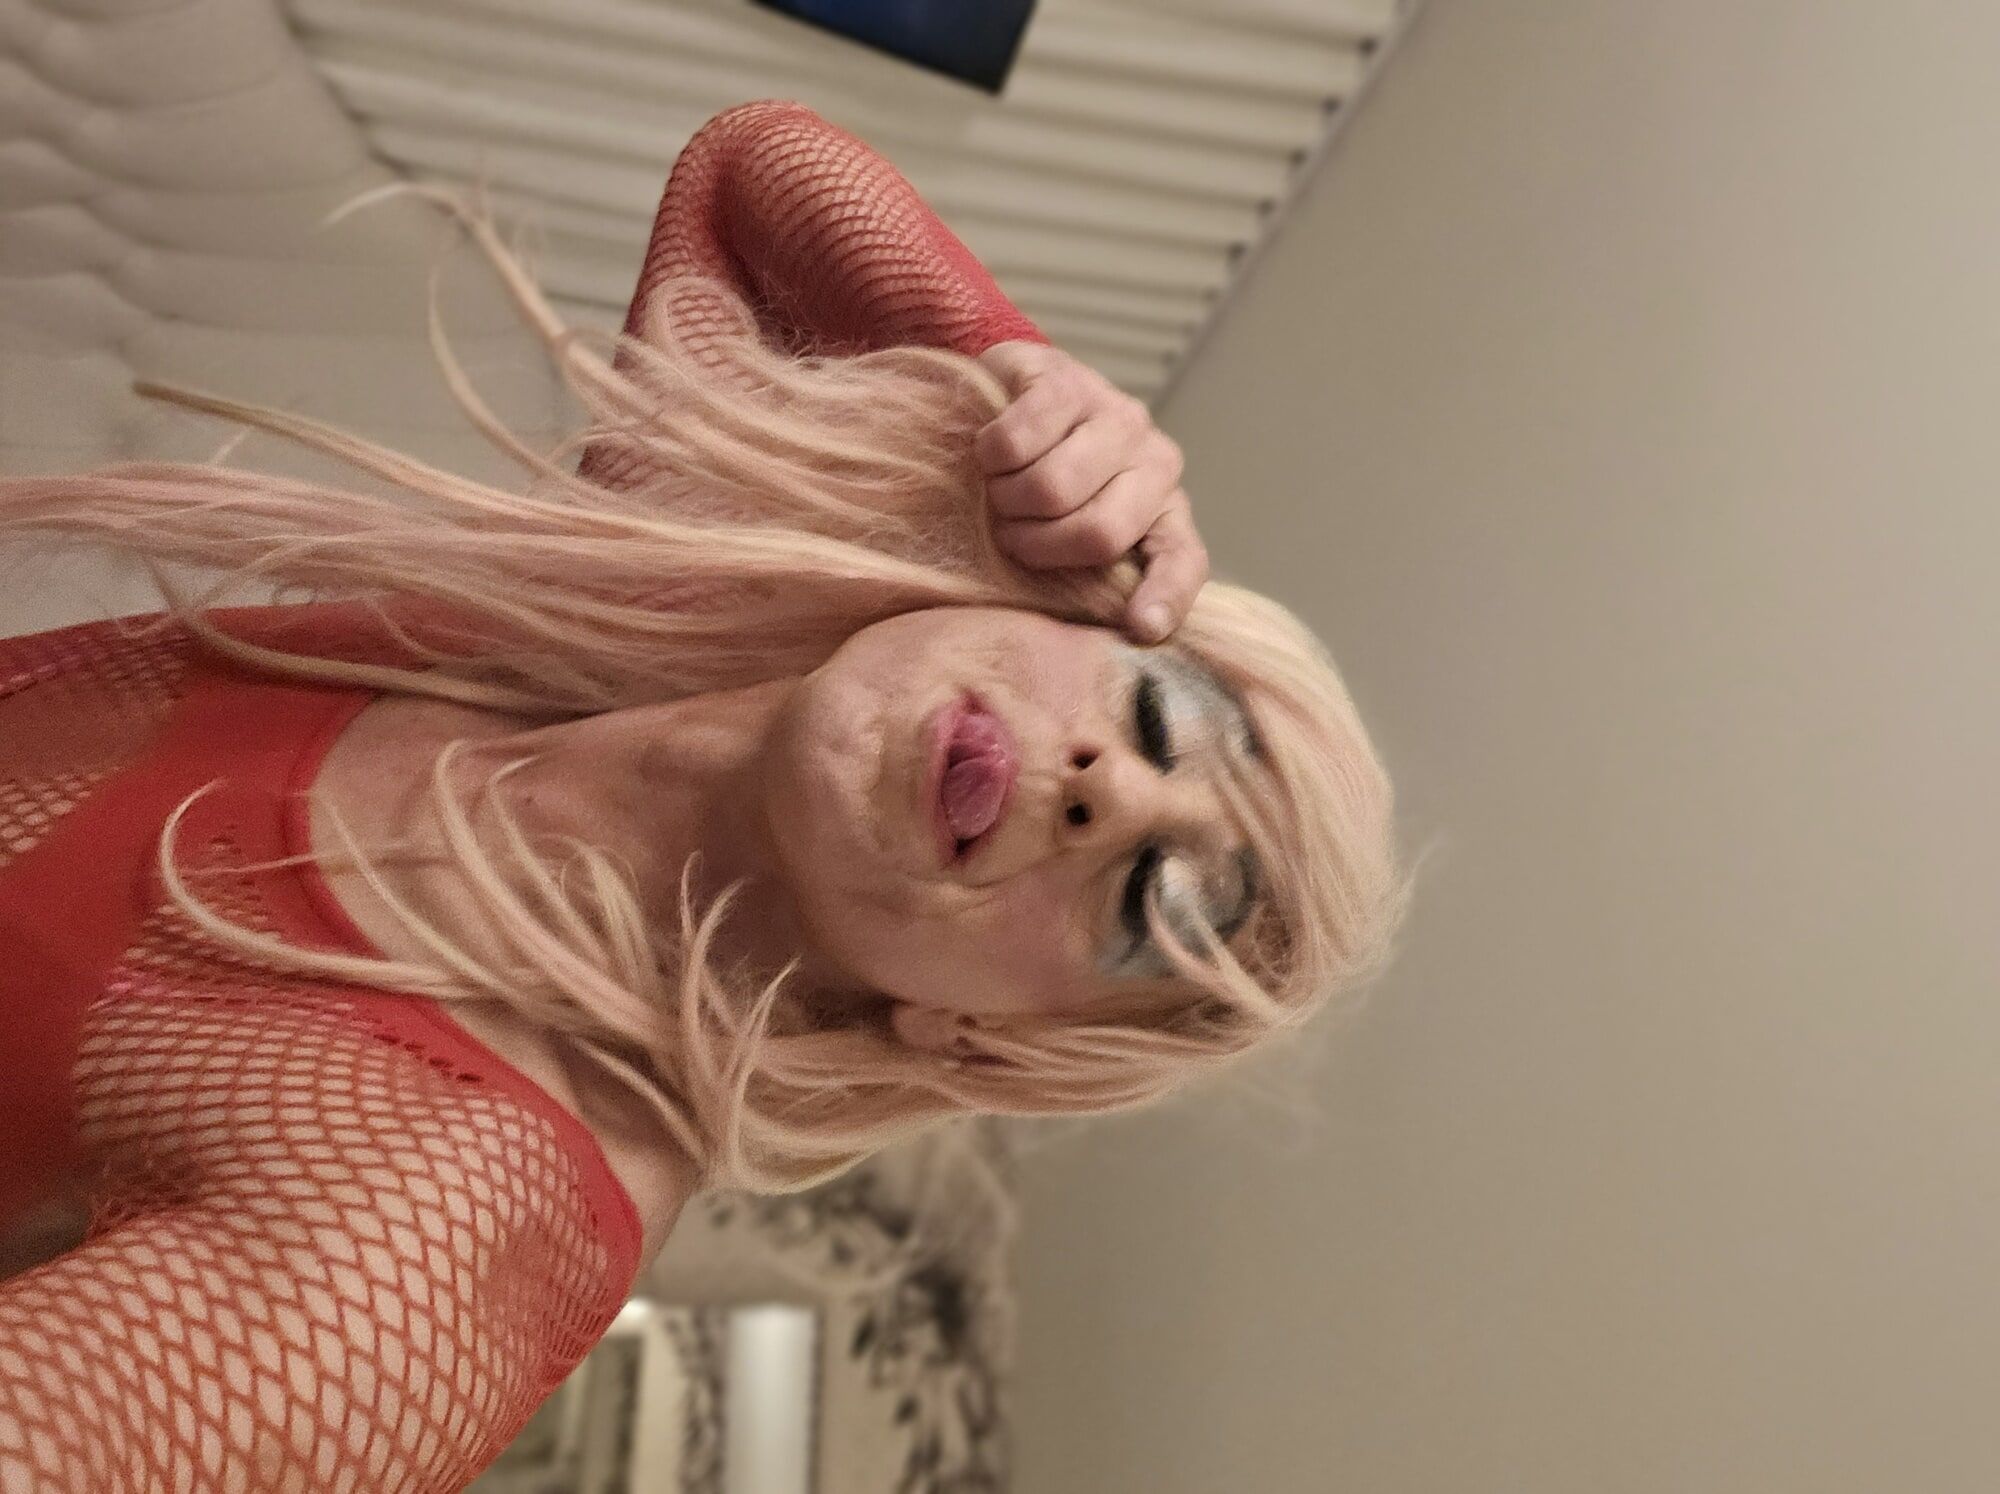 After fuck glow #10